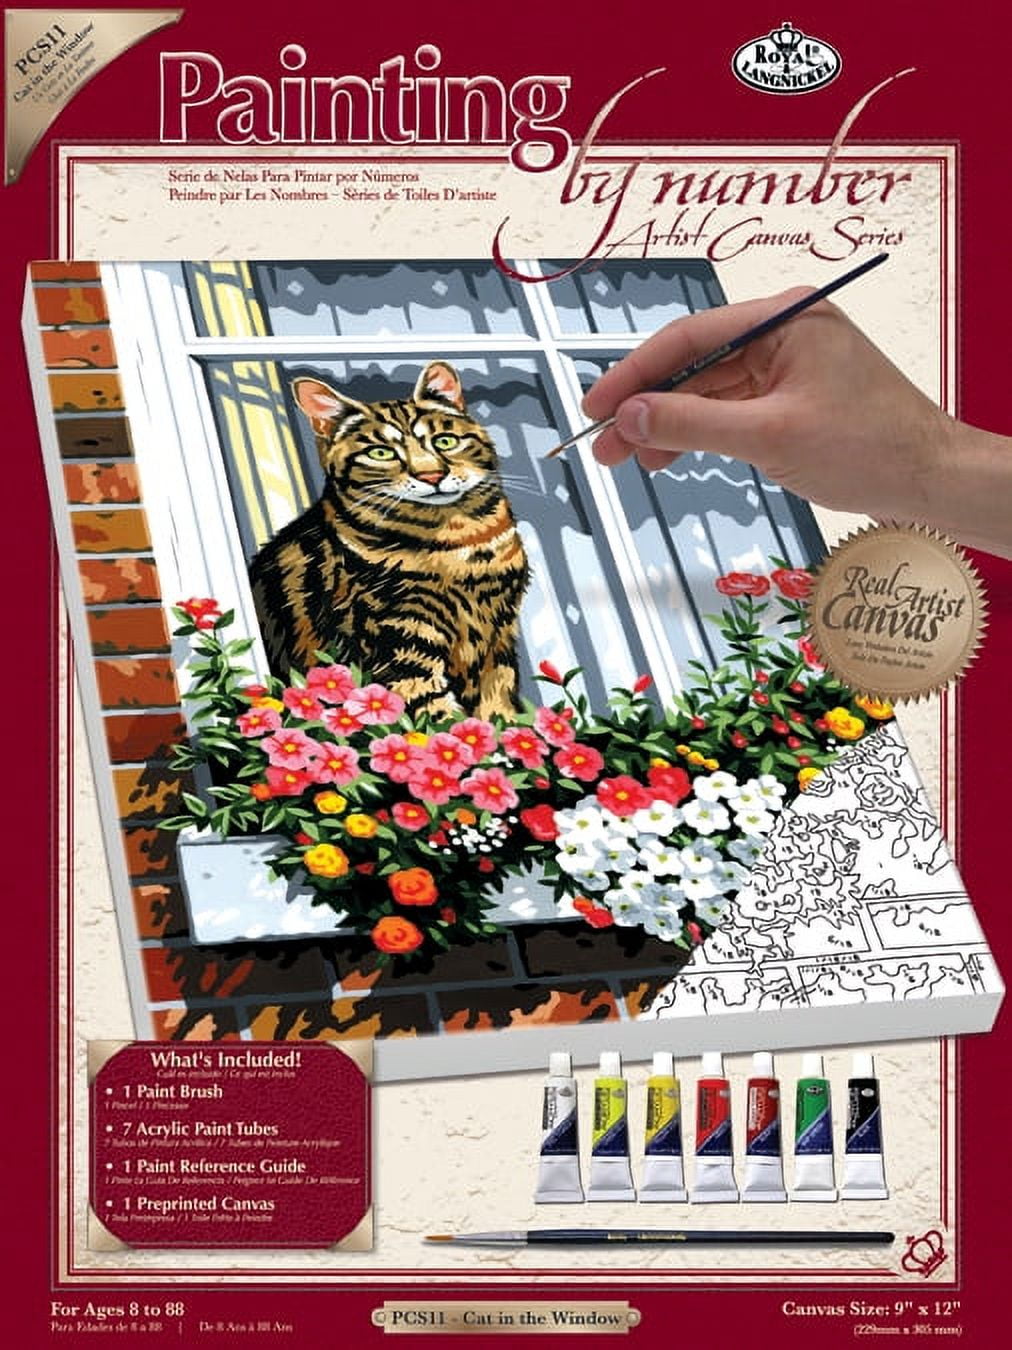 Royal & Langnickel Adult Paint By Numbers New Friends PAL24 – Good's Store  Online